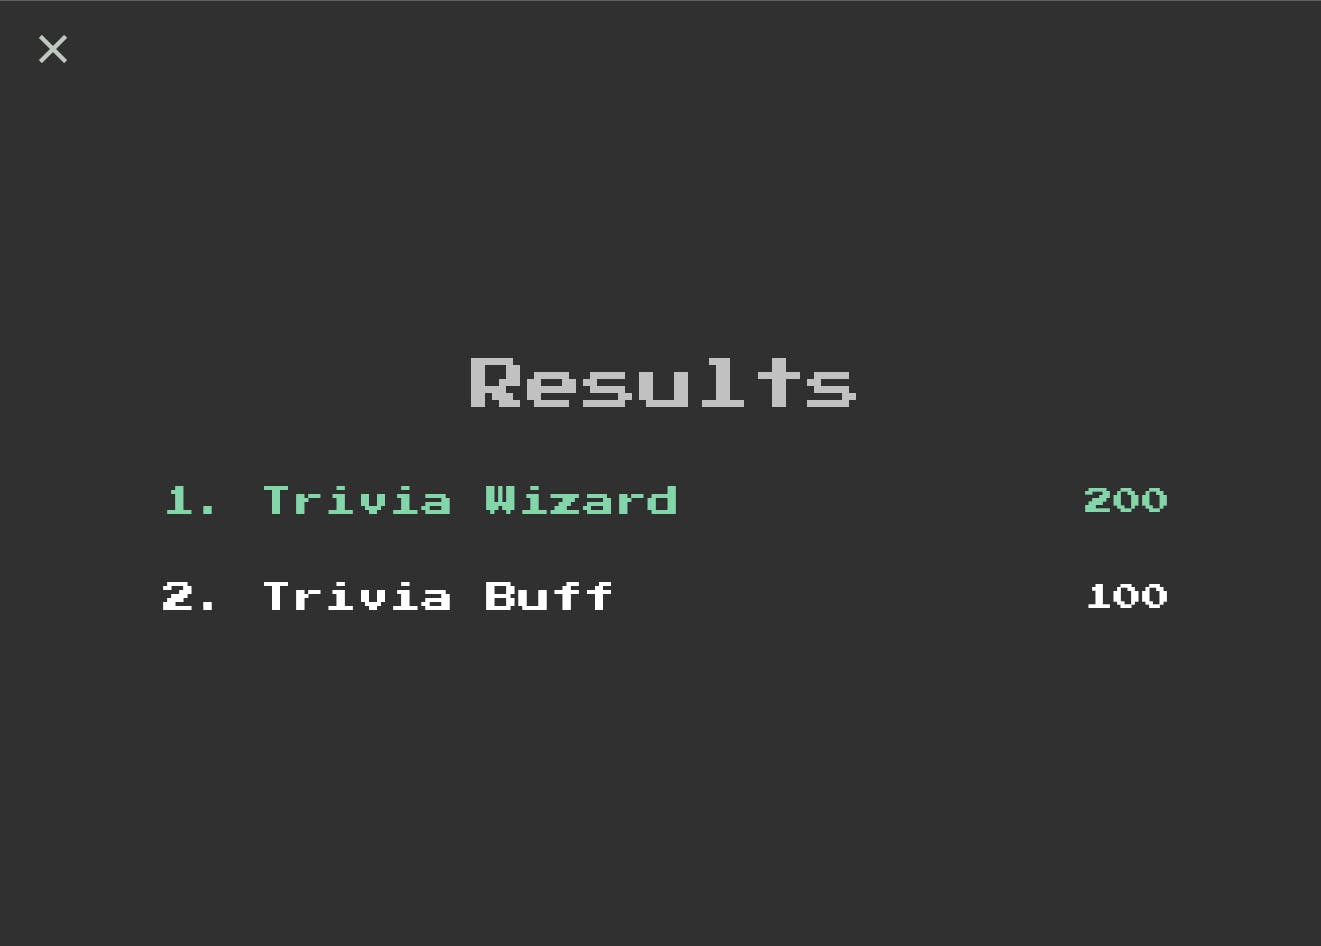 Screenshot of the results of a quiz game, with scores next to each player name